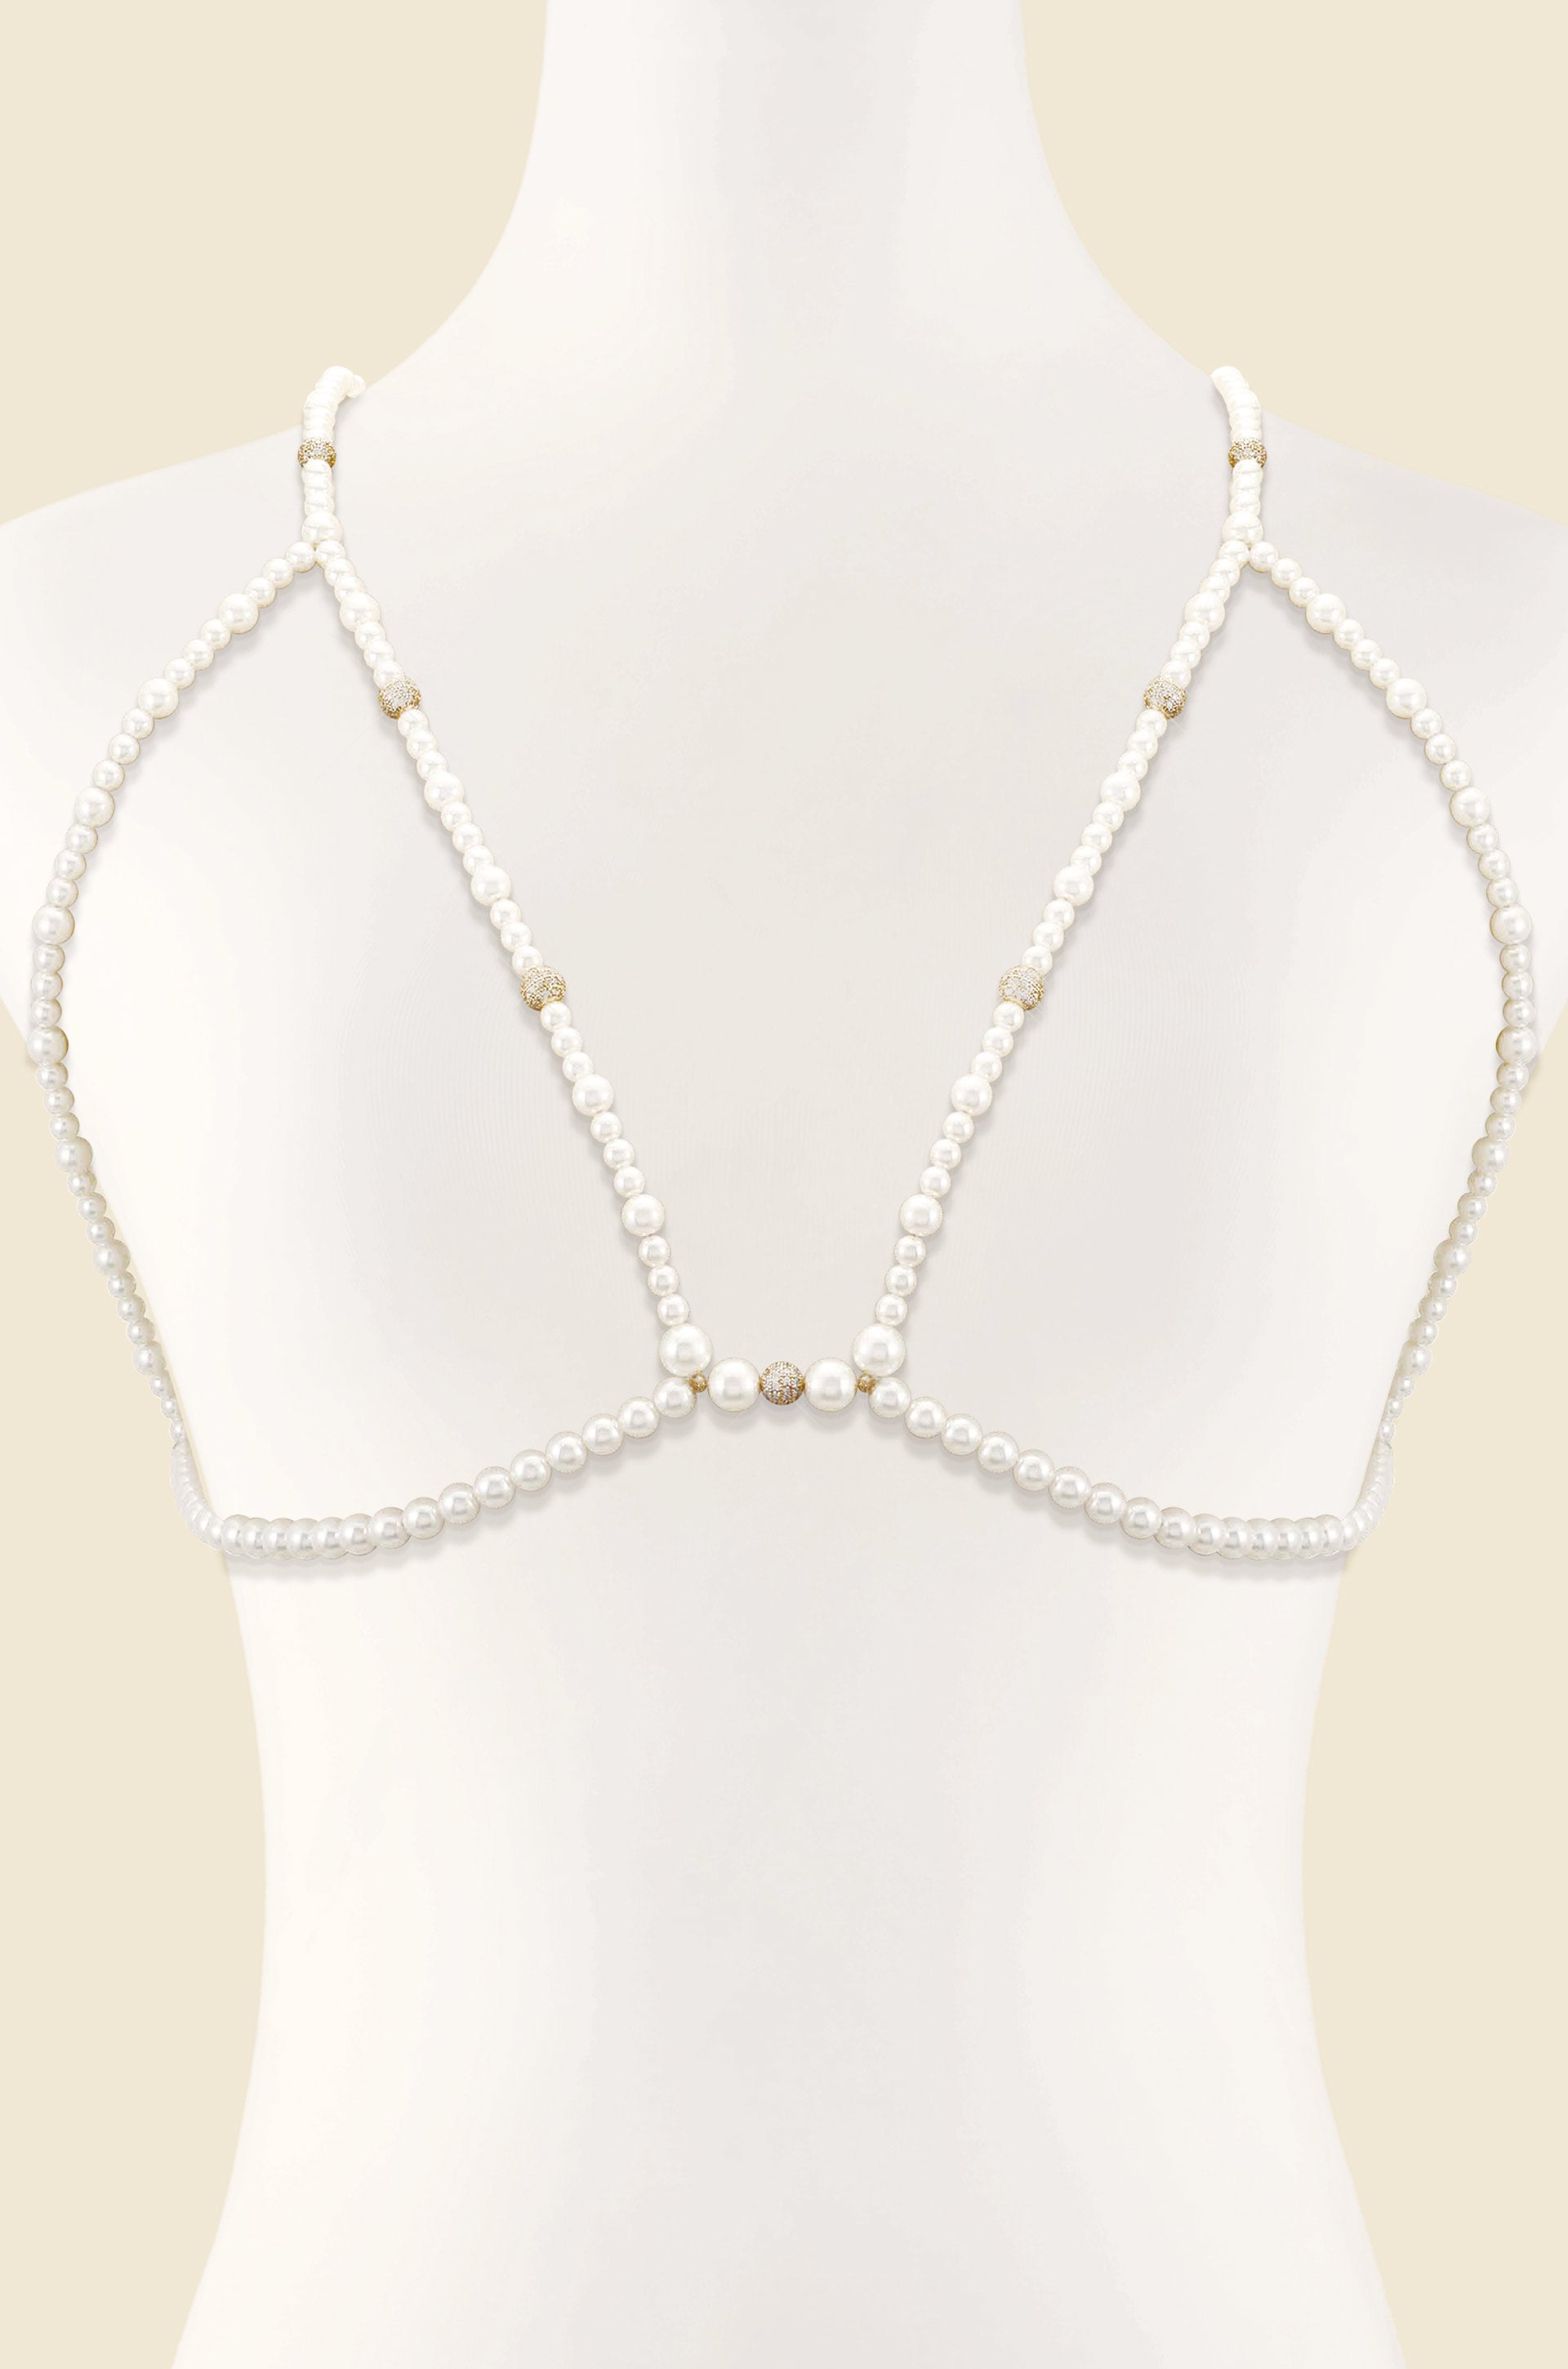 Carat Body Chain All-match Bra Body Chain Pearl Waist Belly Necklace